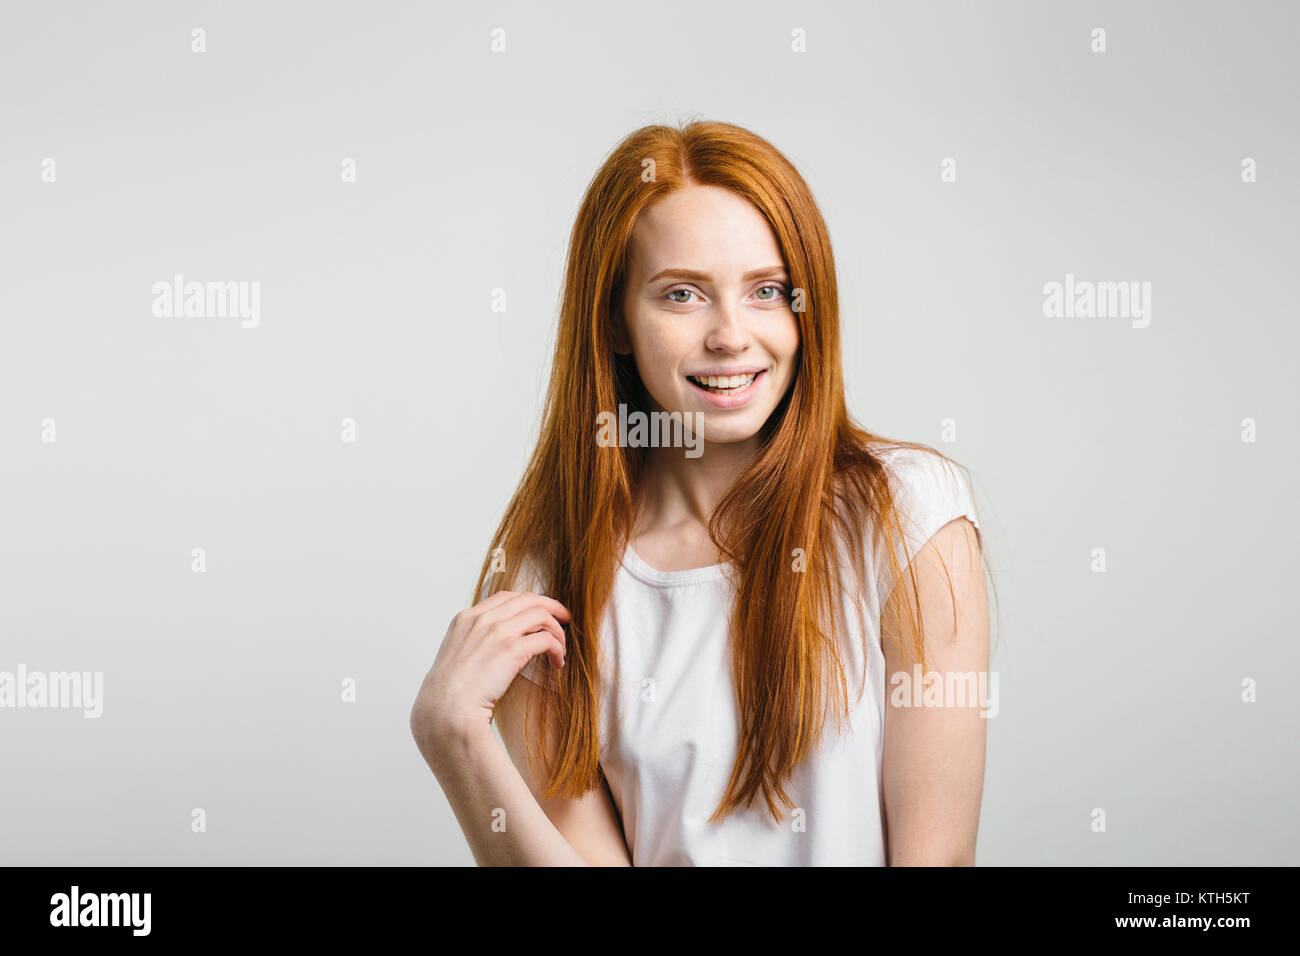 girl smiling with closed eyes touching her red hair over white background Stock Photo